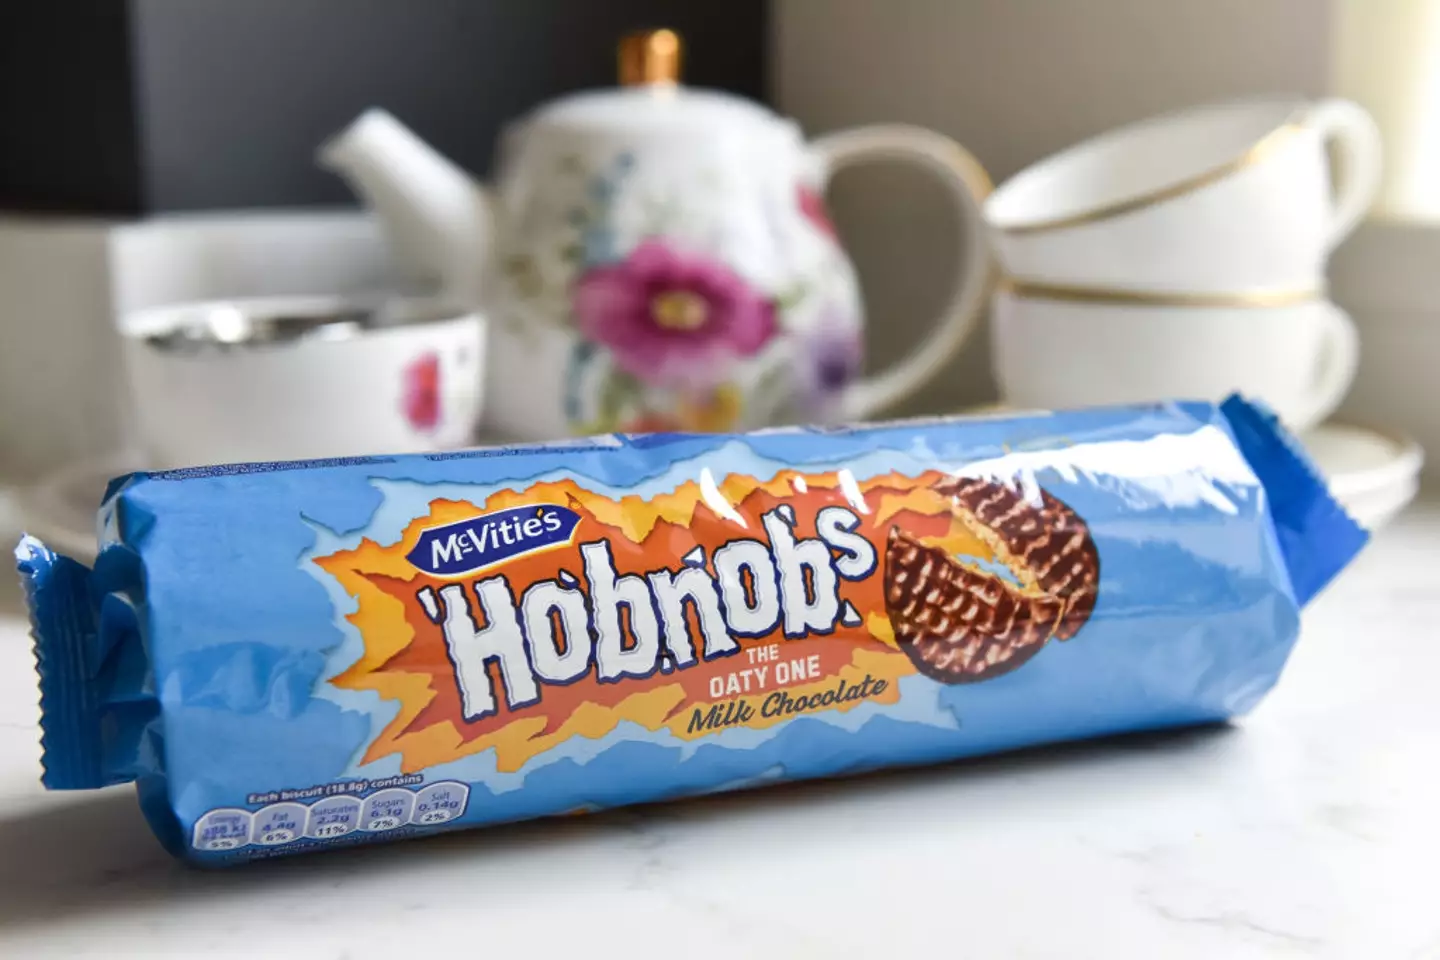 Hobnobs are a classic. (John Keeble/Getty Images)